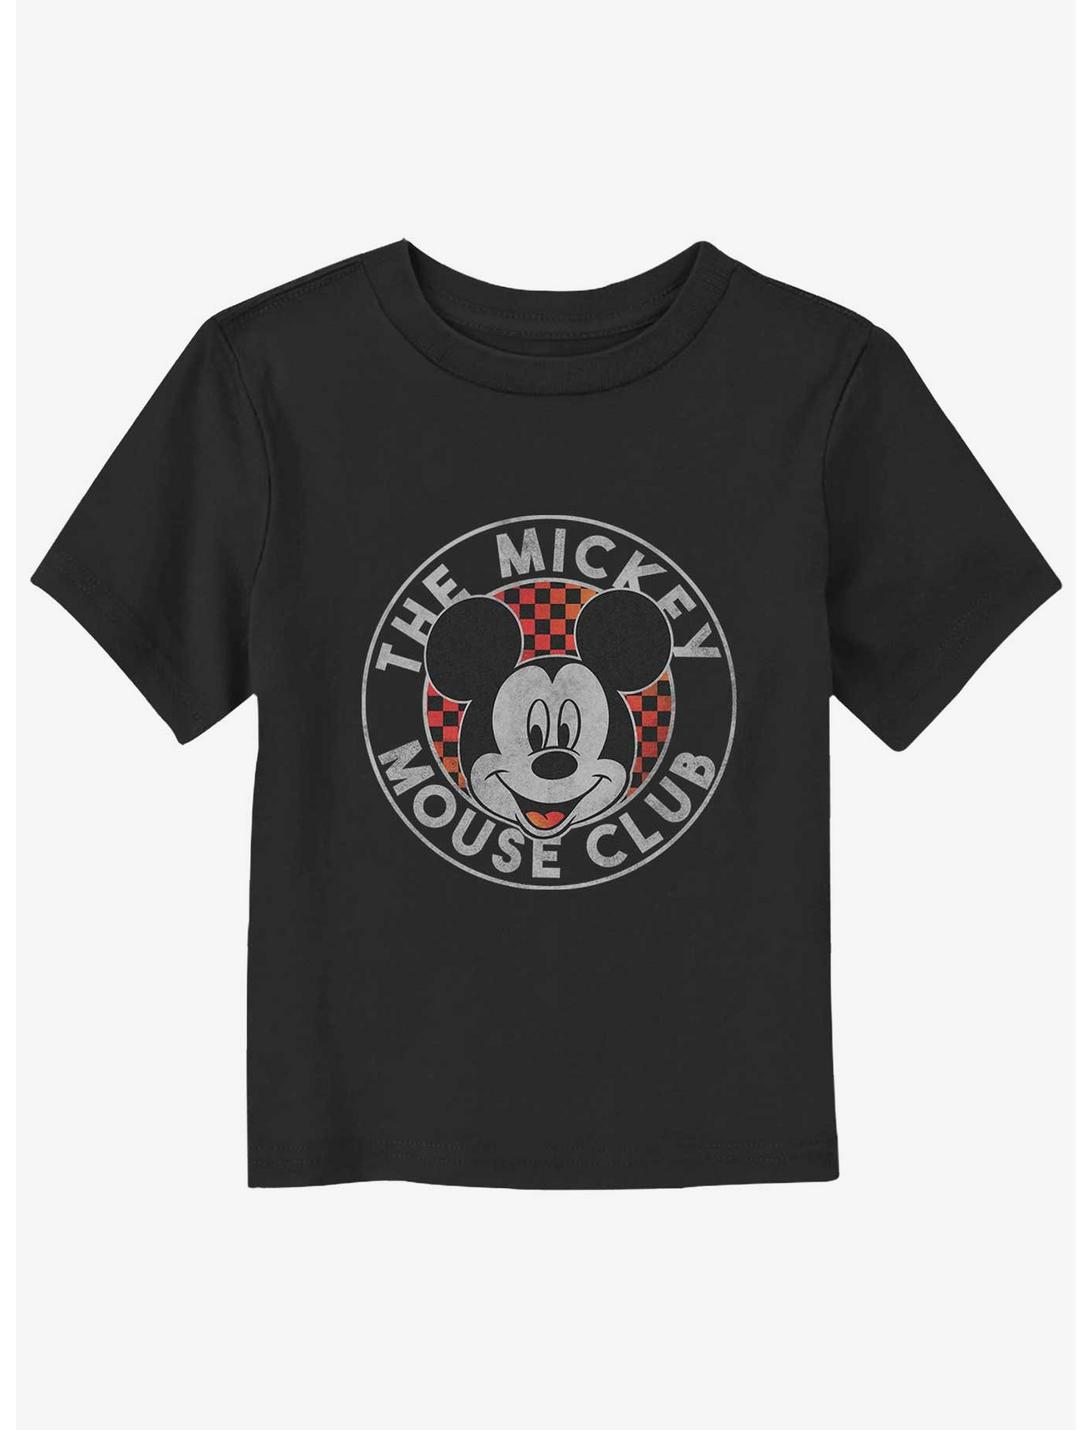 Disney Mickey Mouse The Mickey Mouse Club Toddler T-Shirt, BLACK, hi-res